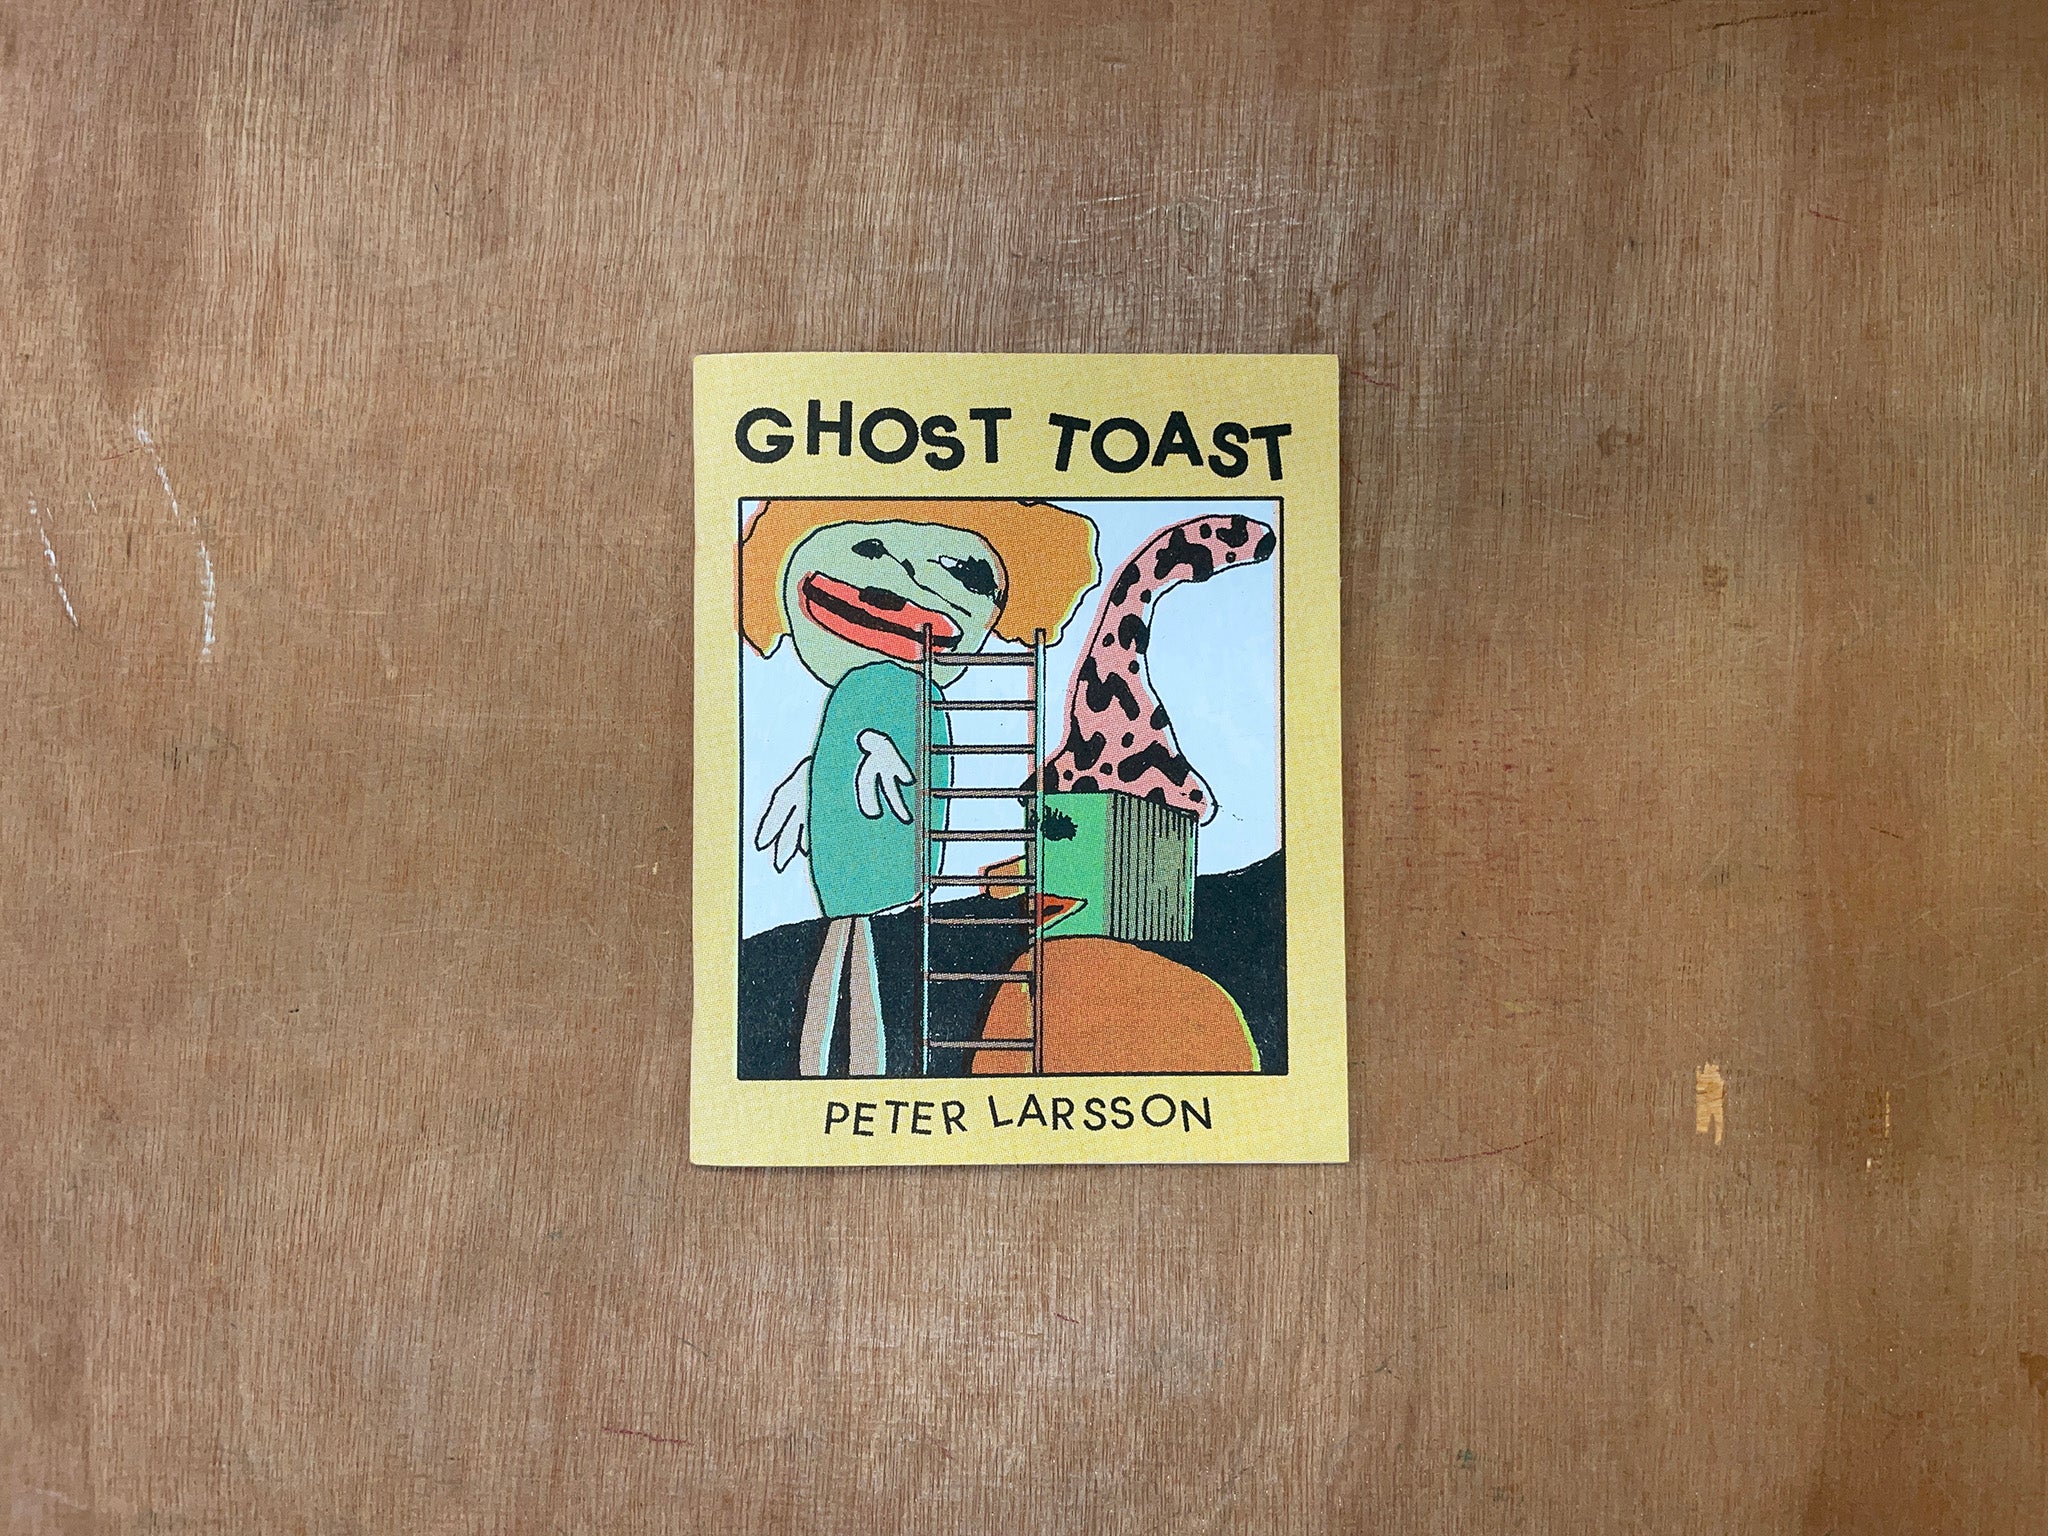 GHOST TOAST by Peter Larsson